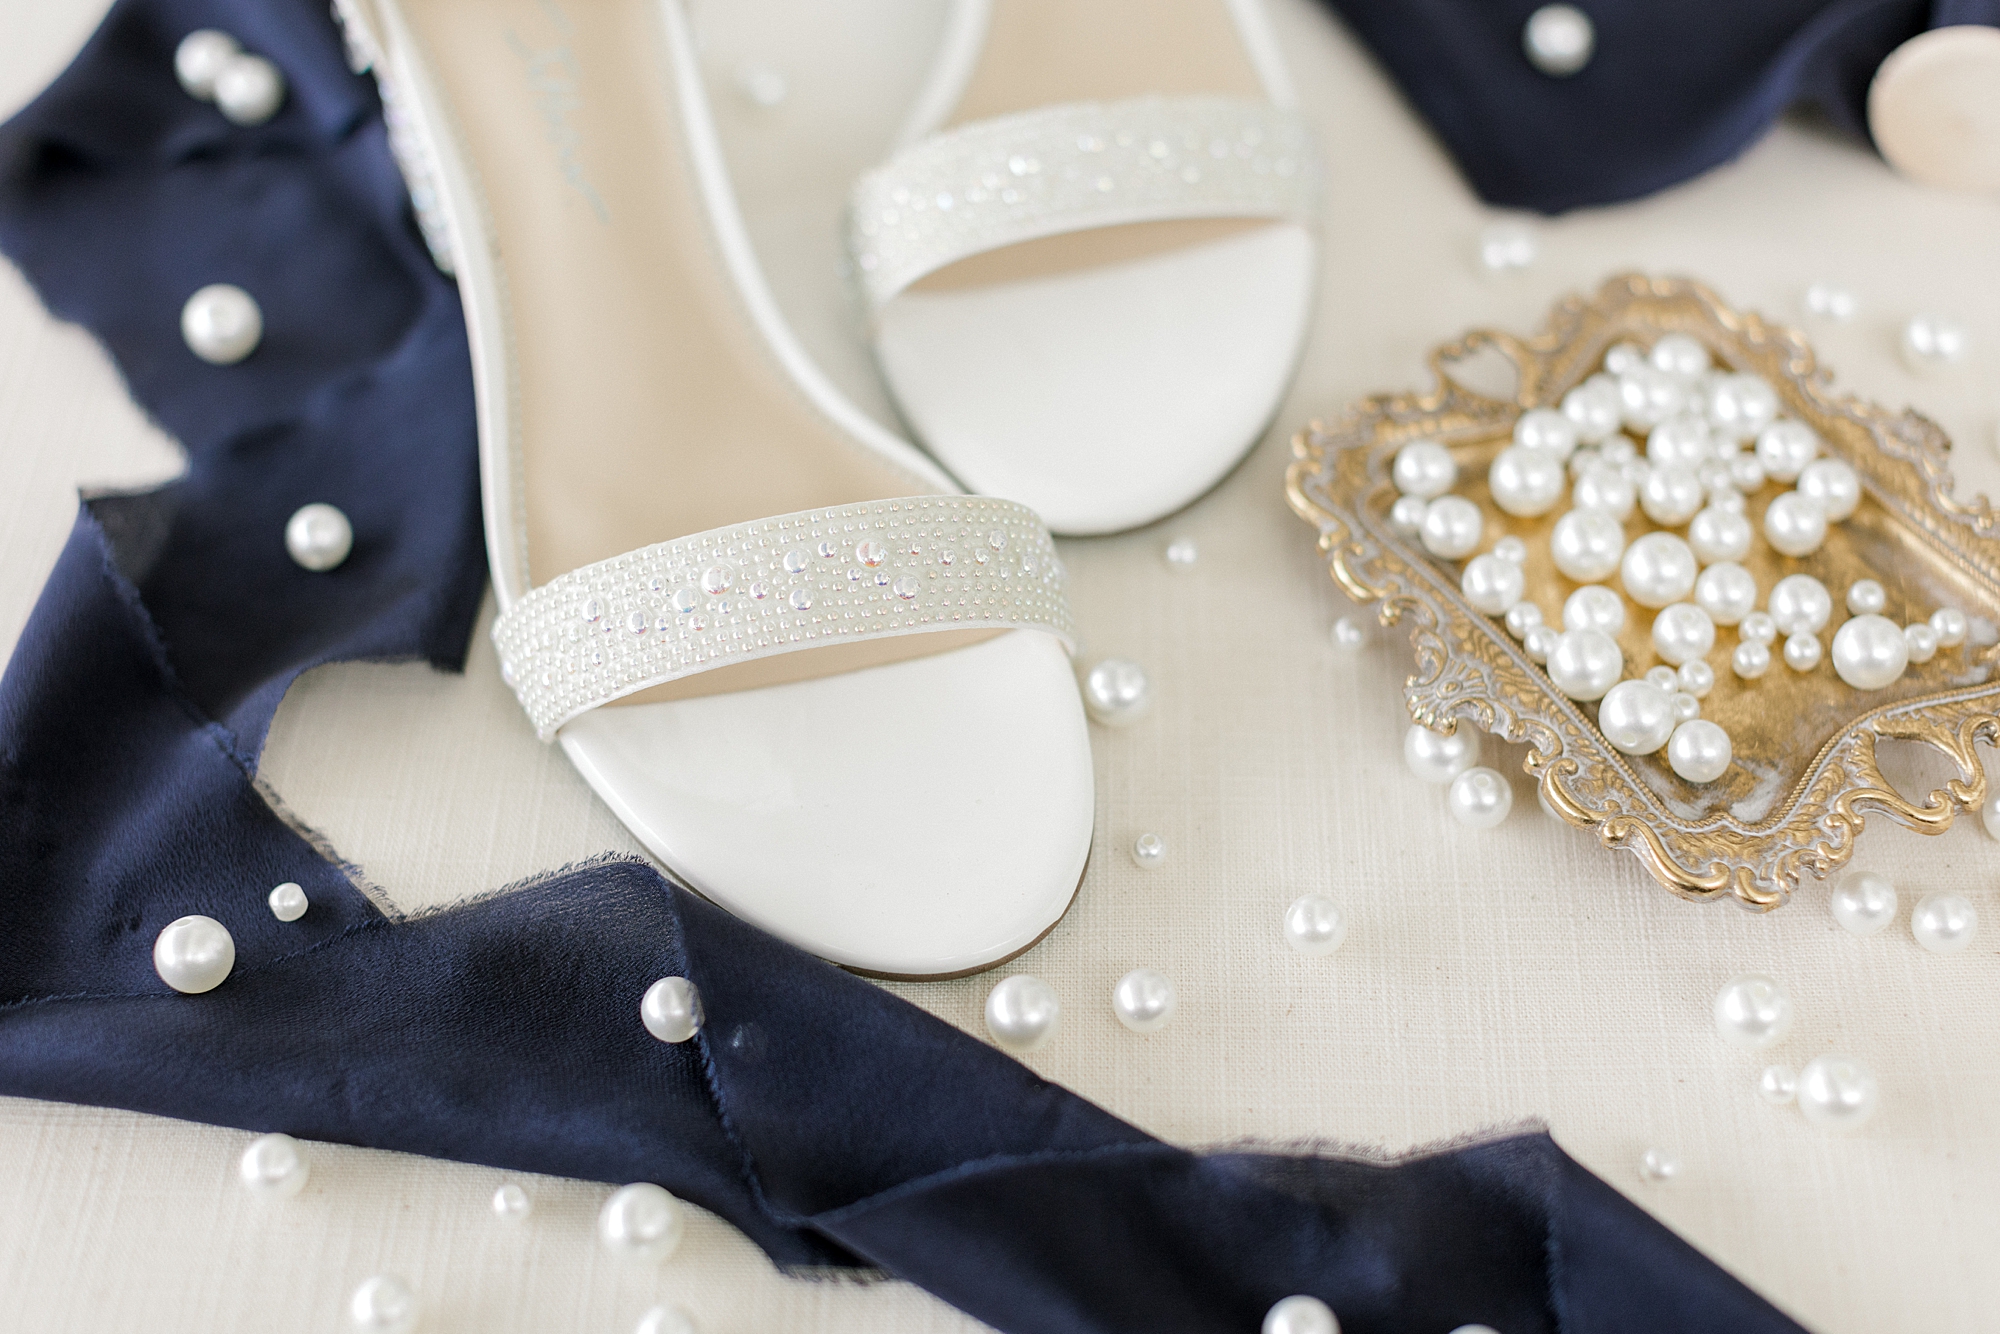 bride's pearl jewelry and white shoes lay near navy ribbon